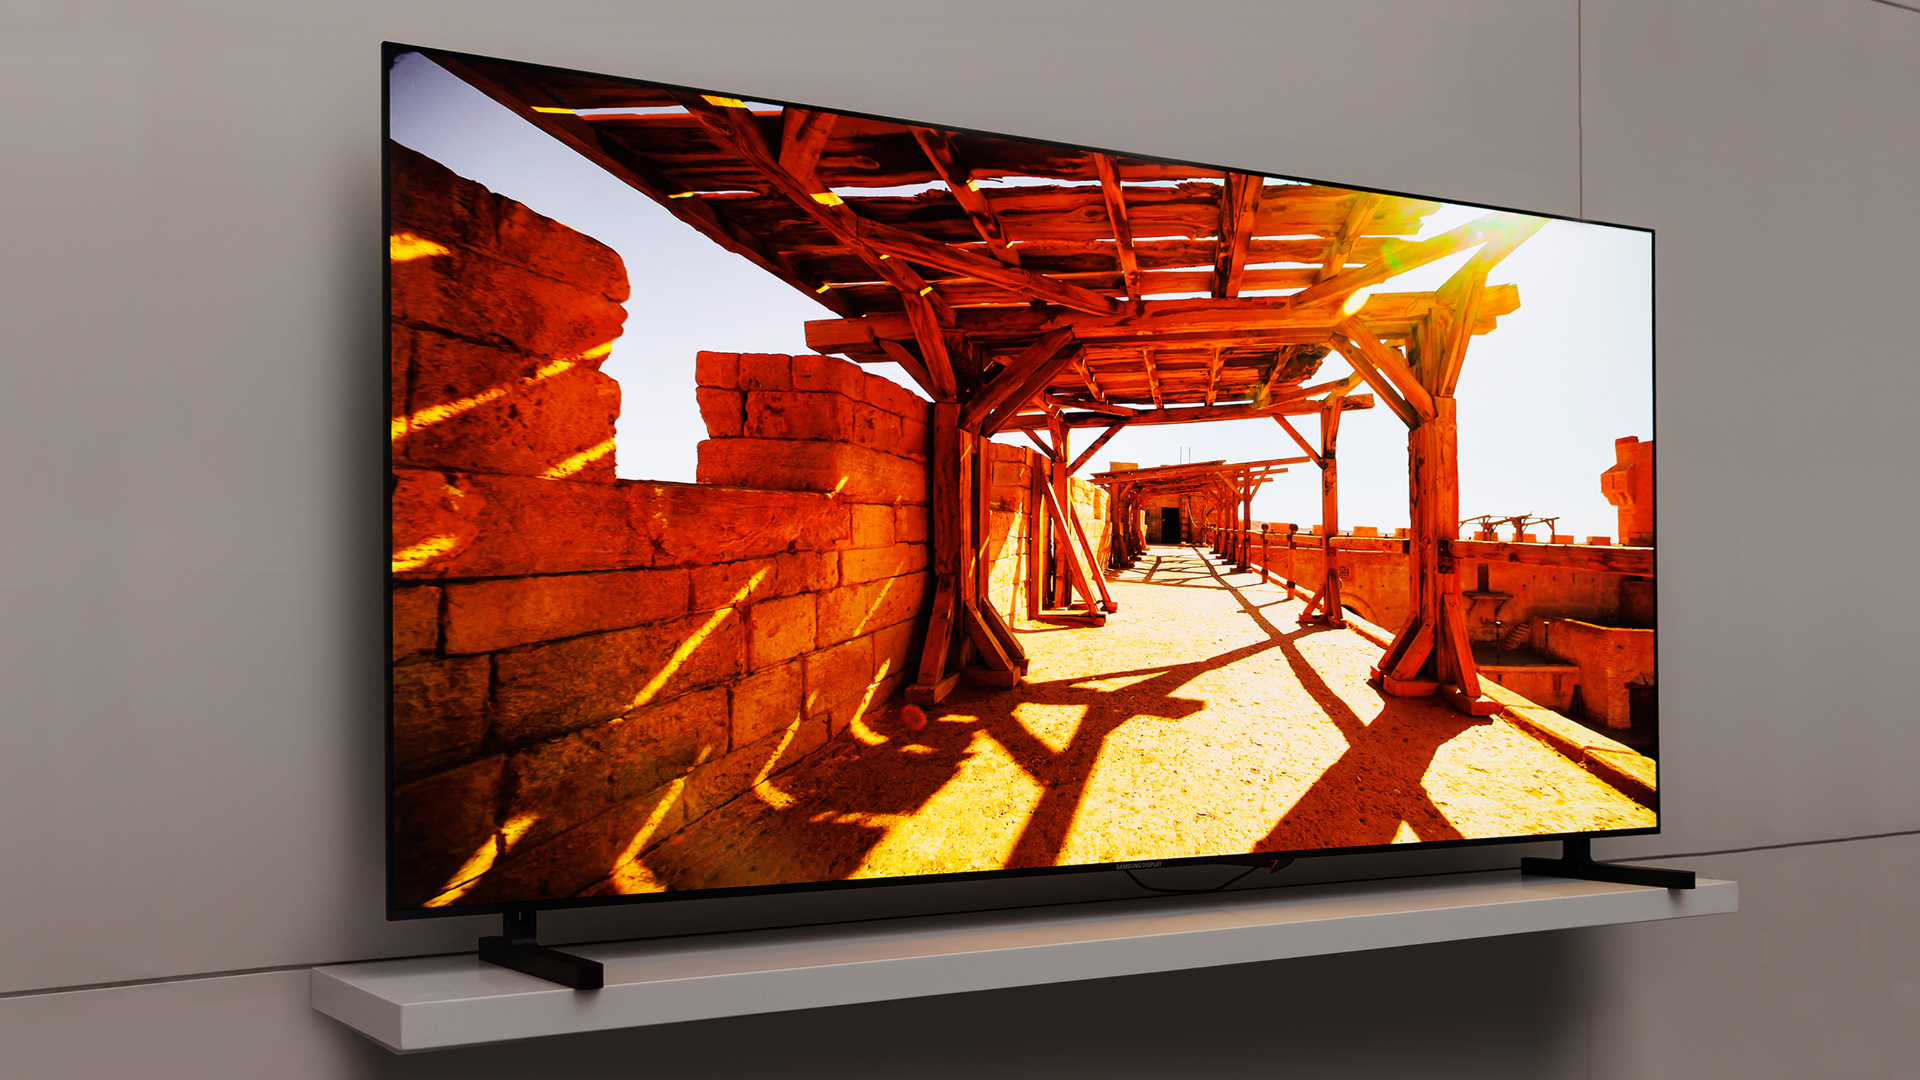 Samsung just crushed LG OLED TVs with its 2023 QD-OLED lineup - SamMobile